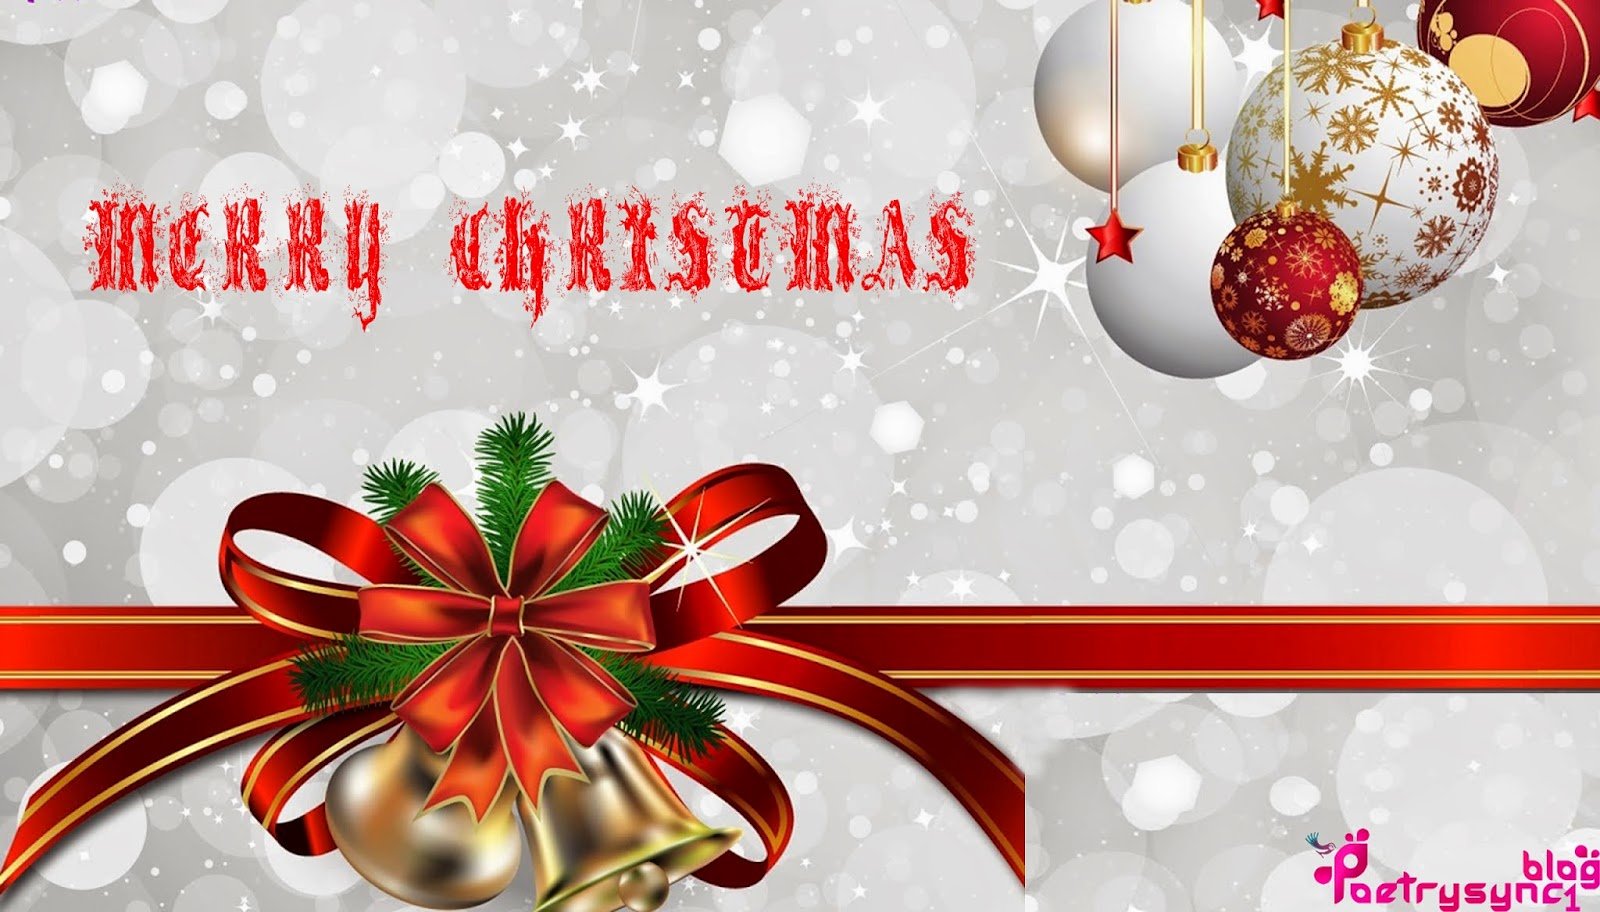 Merry Christmas Wallpapers Balls, Bells And Beautiful Decoration Pictures With Top 25 Quotes And 5 Good Graphics Image By Poetrysync1 blog